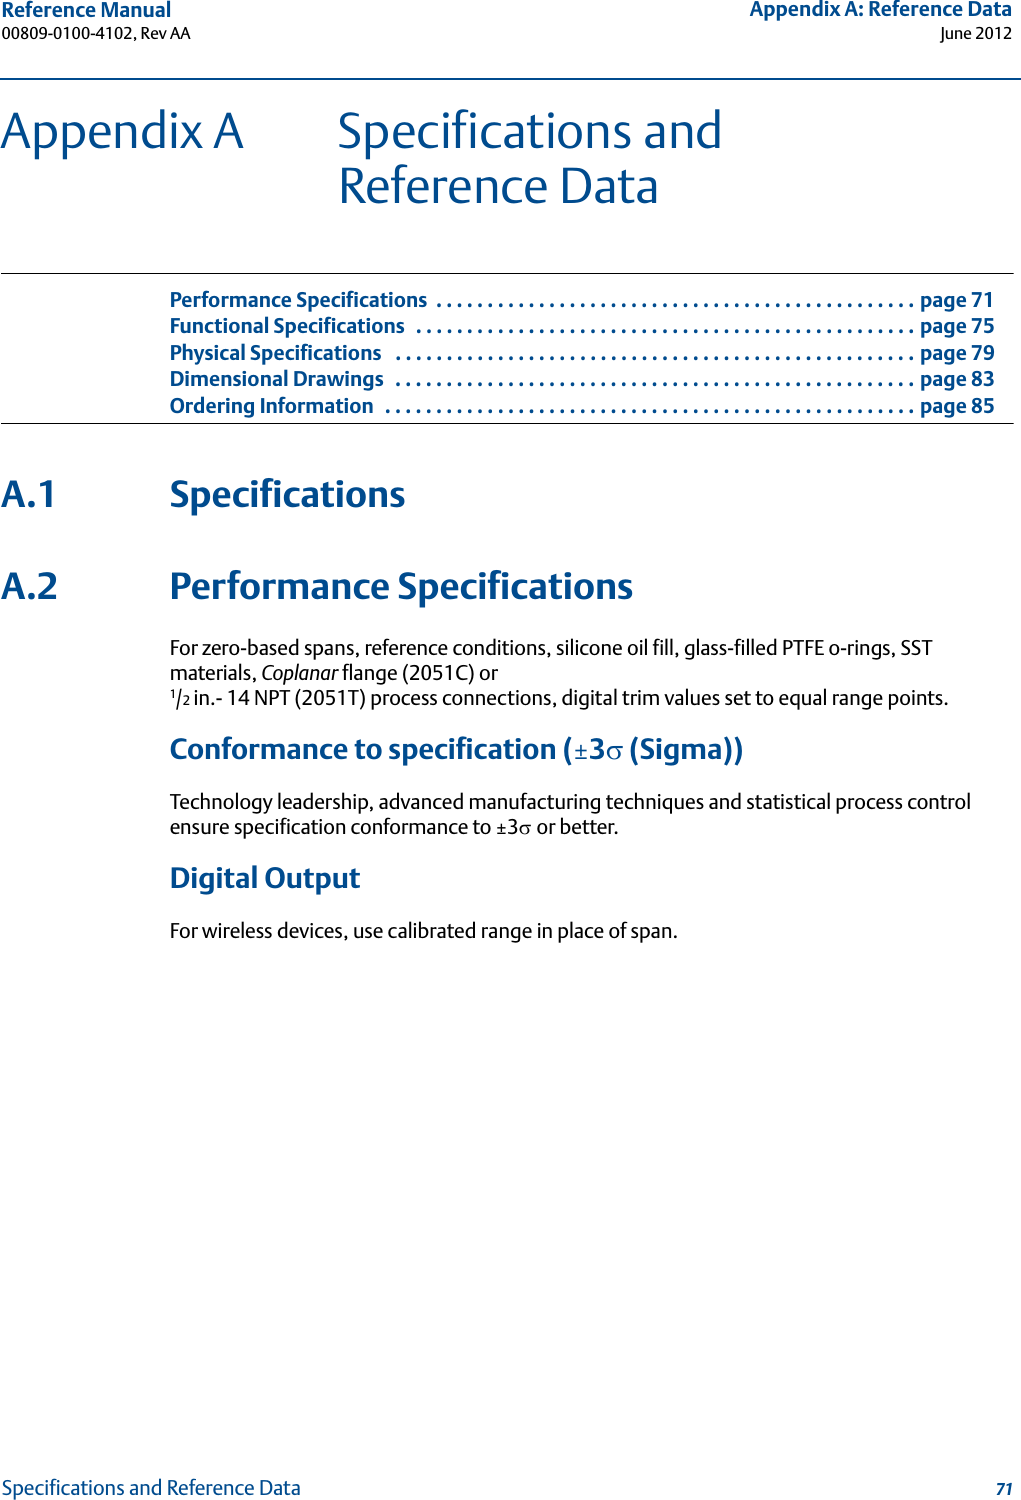 Reference Manual 00809-0100-4102, Rev AAAppendix A: Reference DataJune 201271Specifications and Reference DataAppendix A Specifications and Reference DataPerformance Specifications  . . . . . . . . . . . . . . . . . . . . . . . . . . . . . . . . . . . . . . . . . . . . . . . page 71Functional Specifications  . . . . . . . . . . . . . . . . . . . . . . . . . . . . . . . . . . . . . . . . . . . . . . . . . page 75Physical Specifications   . . . . . . . . . . . . . . . . . . . . . . . . . . . . . . . . . . . . . . . . . . . . . . . . . . . page 79Dimensional Drawings   . . . . . . . . . . . . . . . . . . . . . . . . . . . . . . . . . . . . . . . . . . . . . . . . . . . page 83Ordering Information  . . . . . . . . . . . . . . . . . . . . . . . . . . . . . . . . . . . . . . . . . . . . . . . . . . . . page 85A.1 SpecificationsA.2 Performance SpecificationsFor zero-based spans, reference conditions, silicone oil fill, glass-filled PTFE o-rings, SST materials, Coplanar flange (2051C) or 1/2 in.- 14 NPT (2051T) process connections, digital trim values set to equal range points.Conformance to specification (±3 (Sigma))Technology leadership, advanced manufacturing techniques and statistical process control ensure specification conformance to ±3or better.Digital OutputFor wireless devices, use calibrated range in place of span.